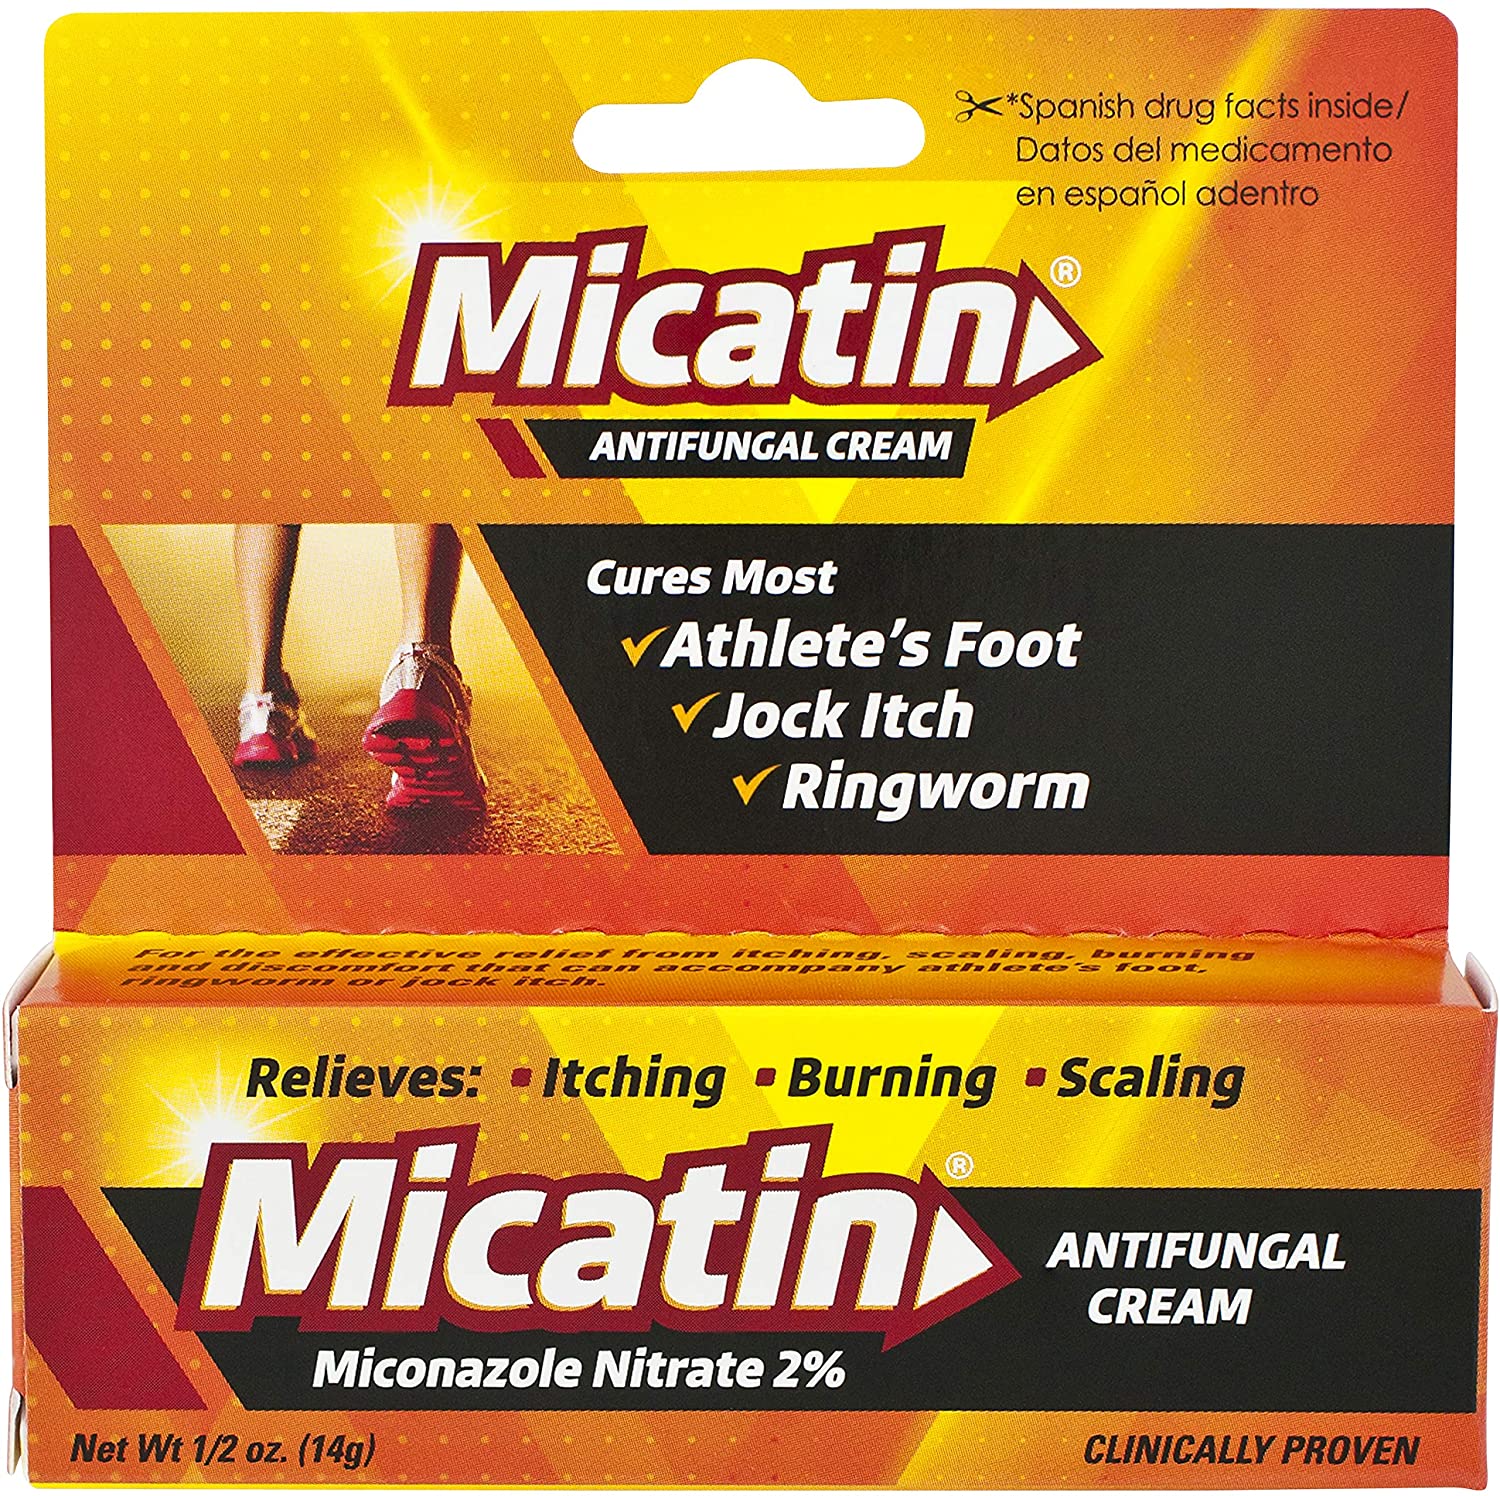 Micatin Antifungal Cream with Miconazole Nitrate 2%, Clinically Proven to Treat Athlete's Foot, Jock Itch, Ringworm and Foot Fungus, Pack of 2 - 0.5Oz (14g)